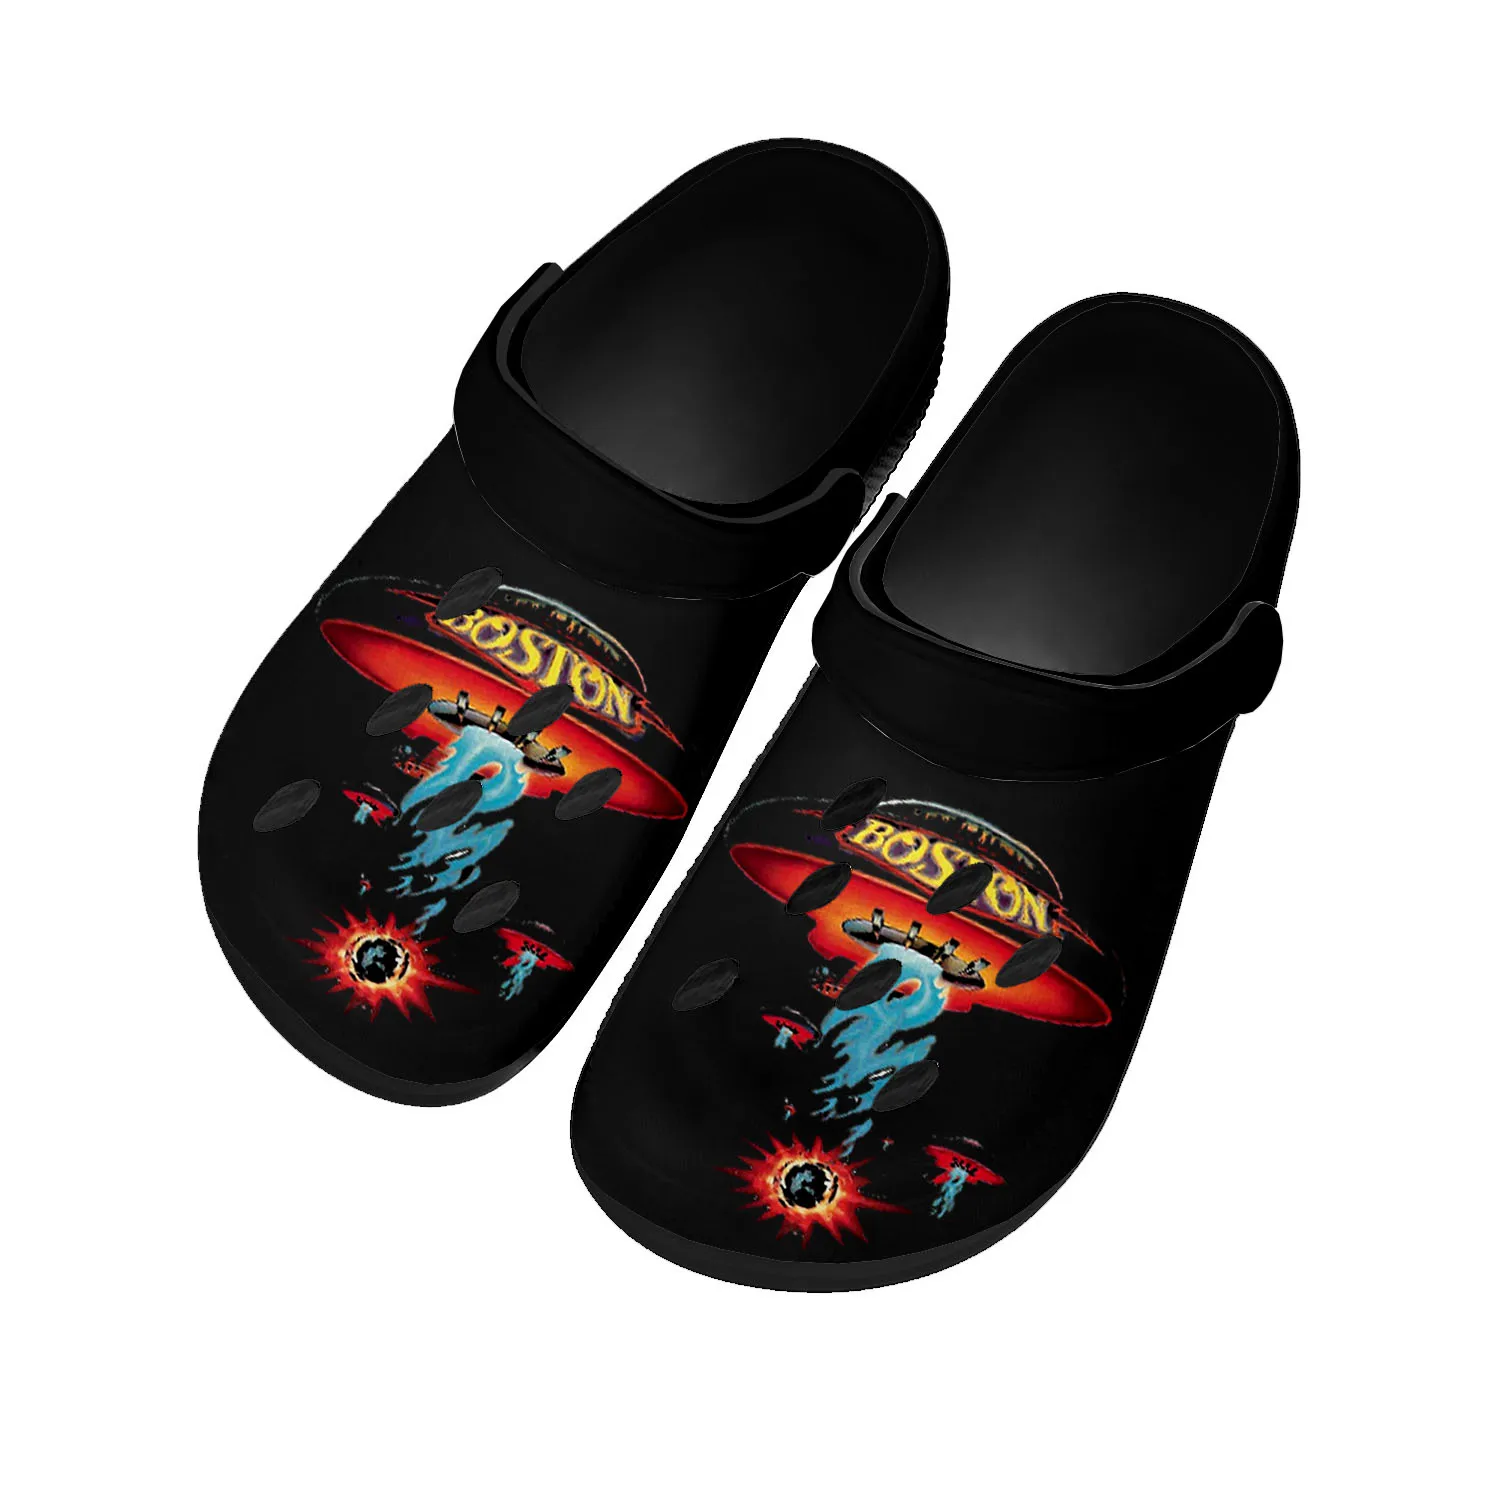 

Boston Band Rock Band Home Clogs Custom Water Shoes Mens Womens Teenager Shoe Garden Clog Breathable Beach Hole Slippers Black